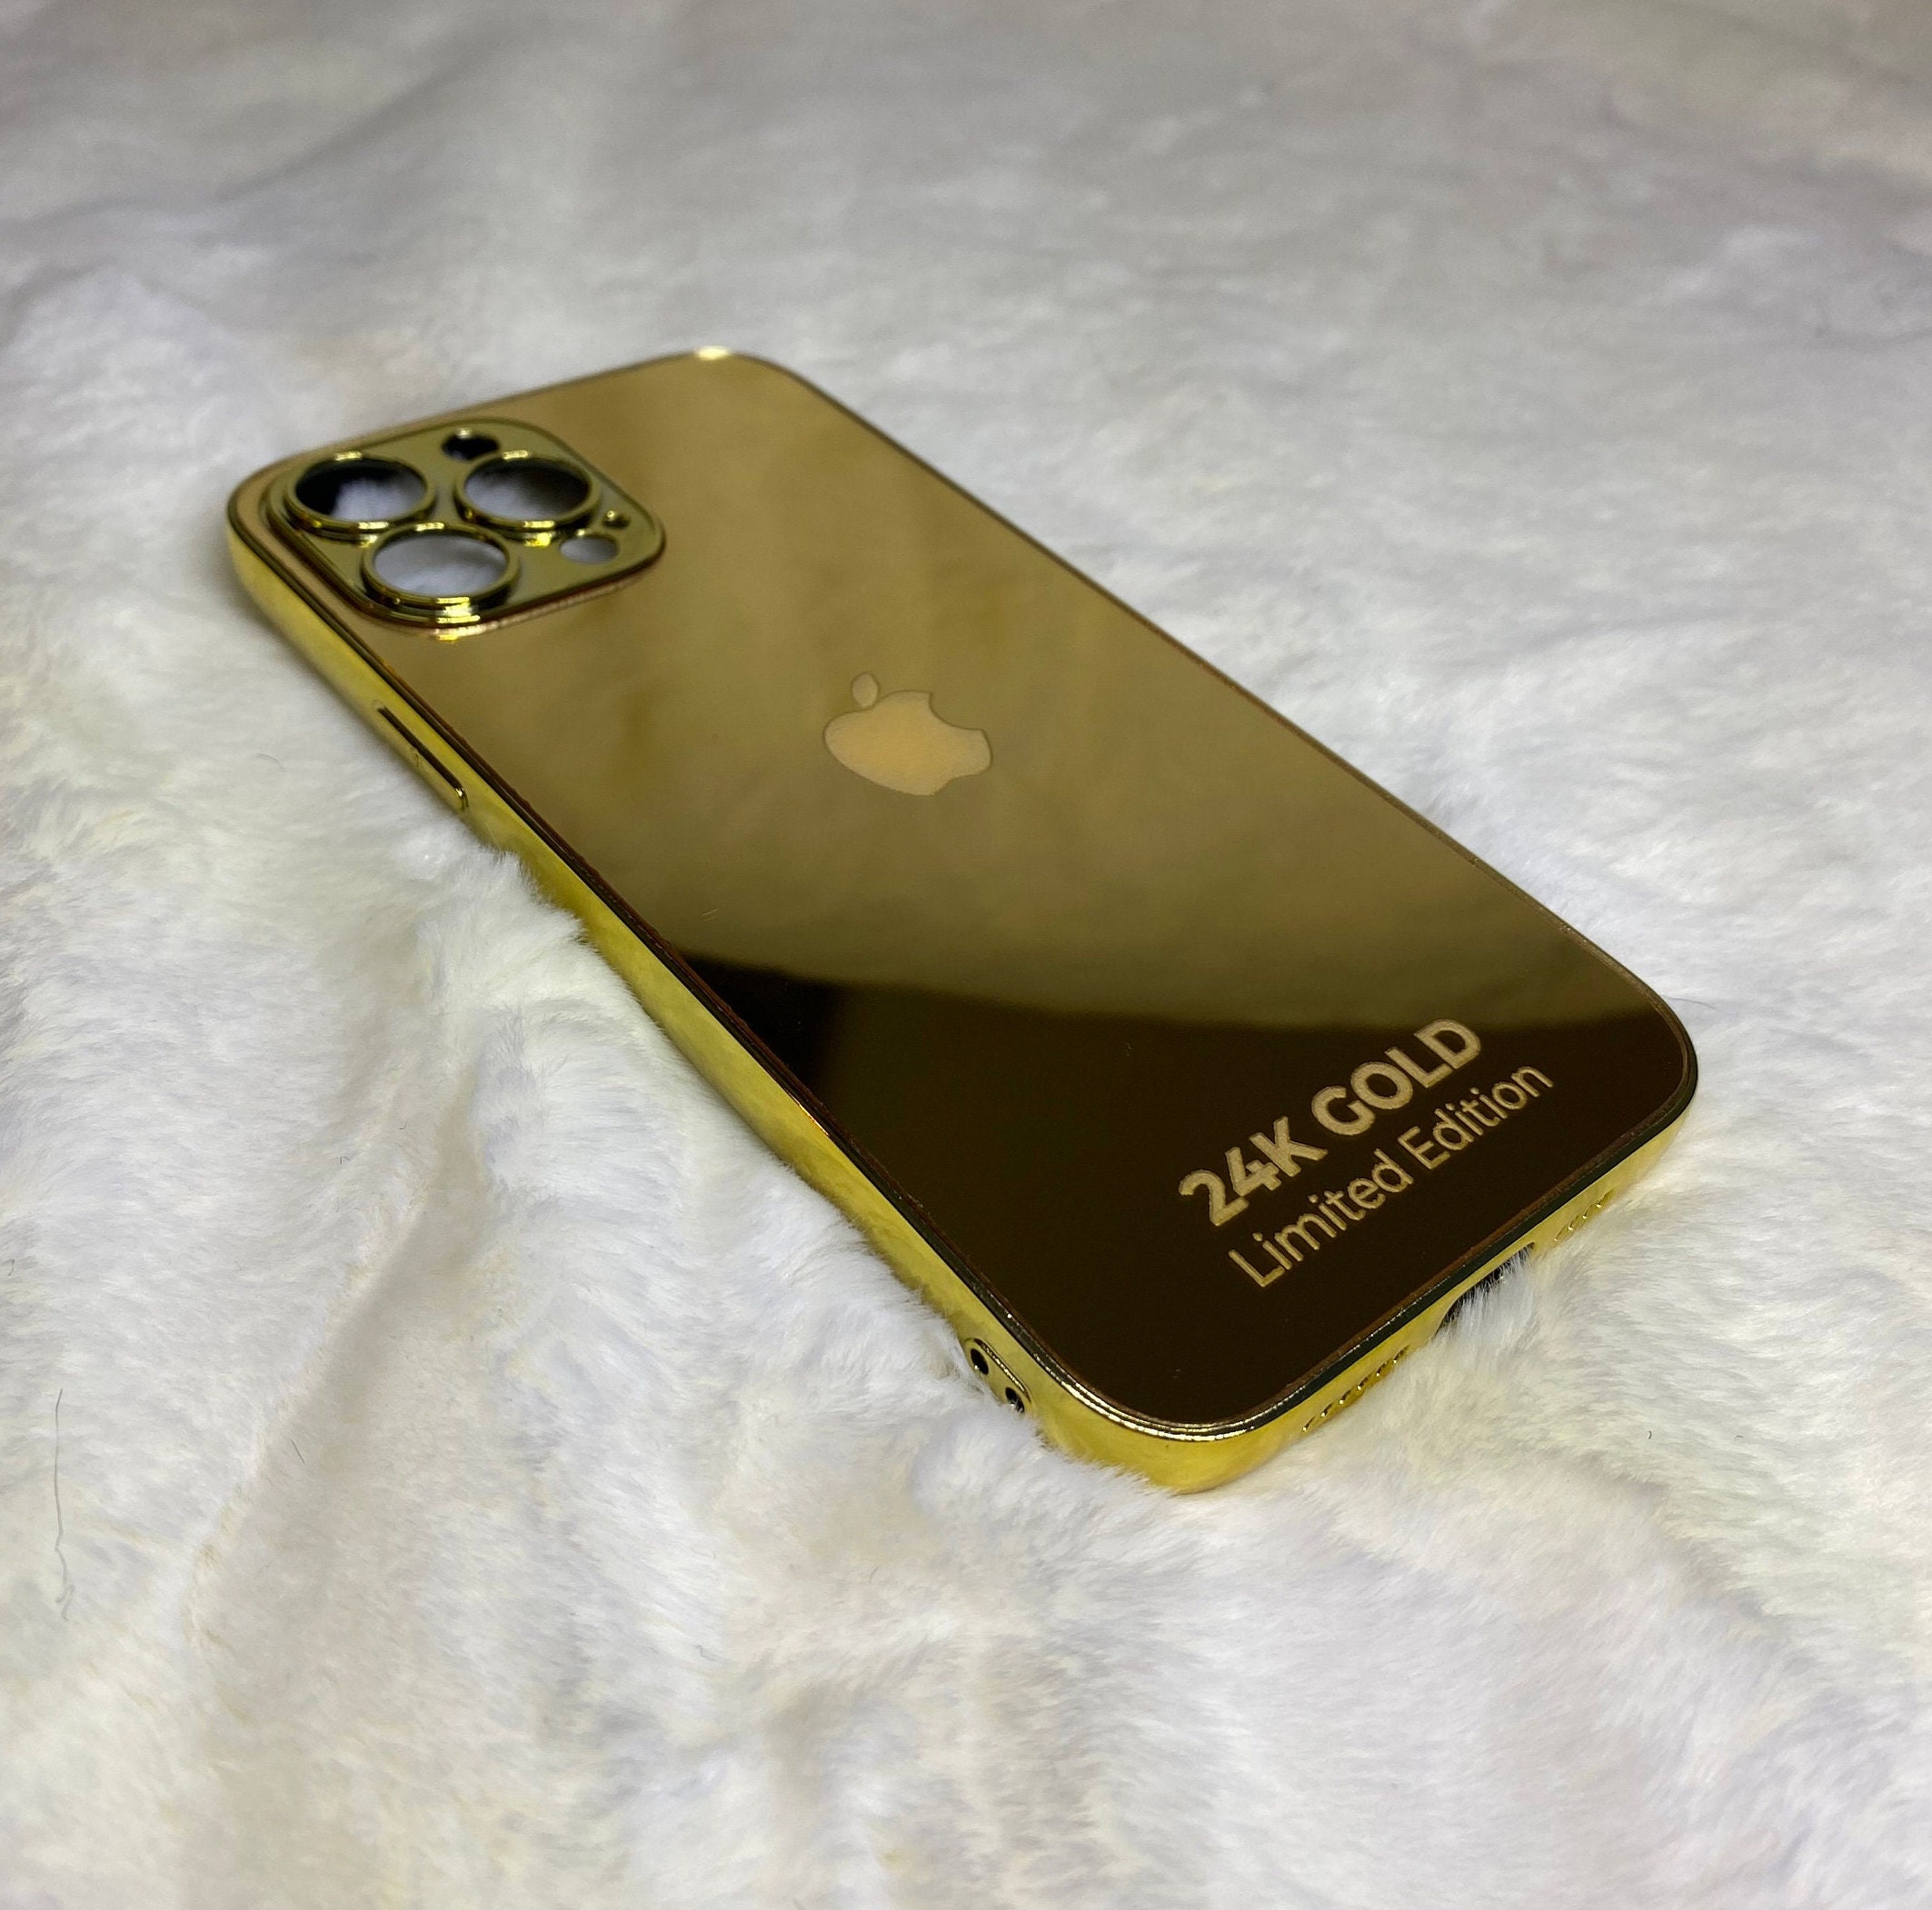 Custom iPhone 13 Pro Max 1 TB with Diamond Bezel and 24k Gold Plated Back